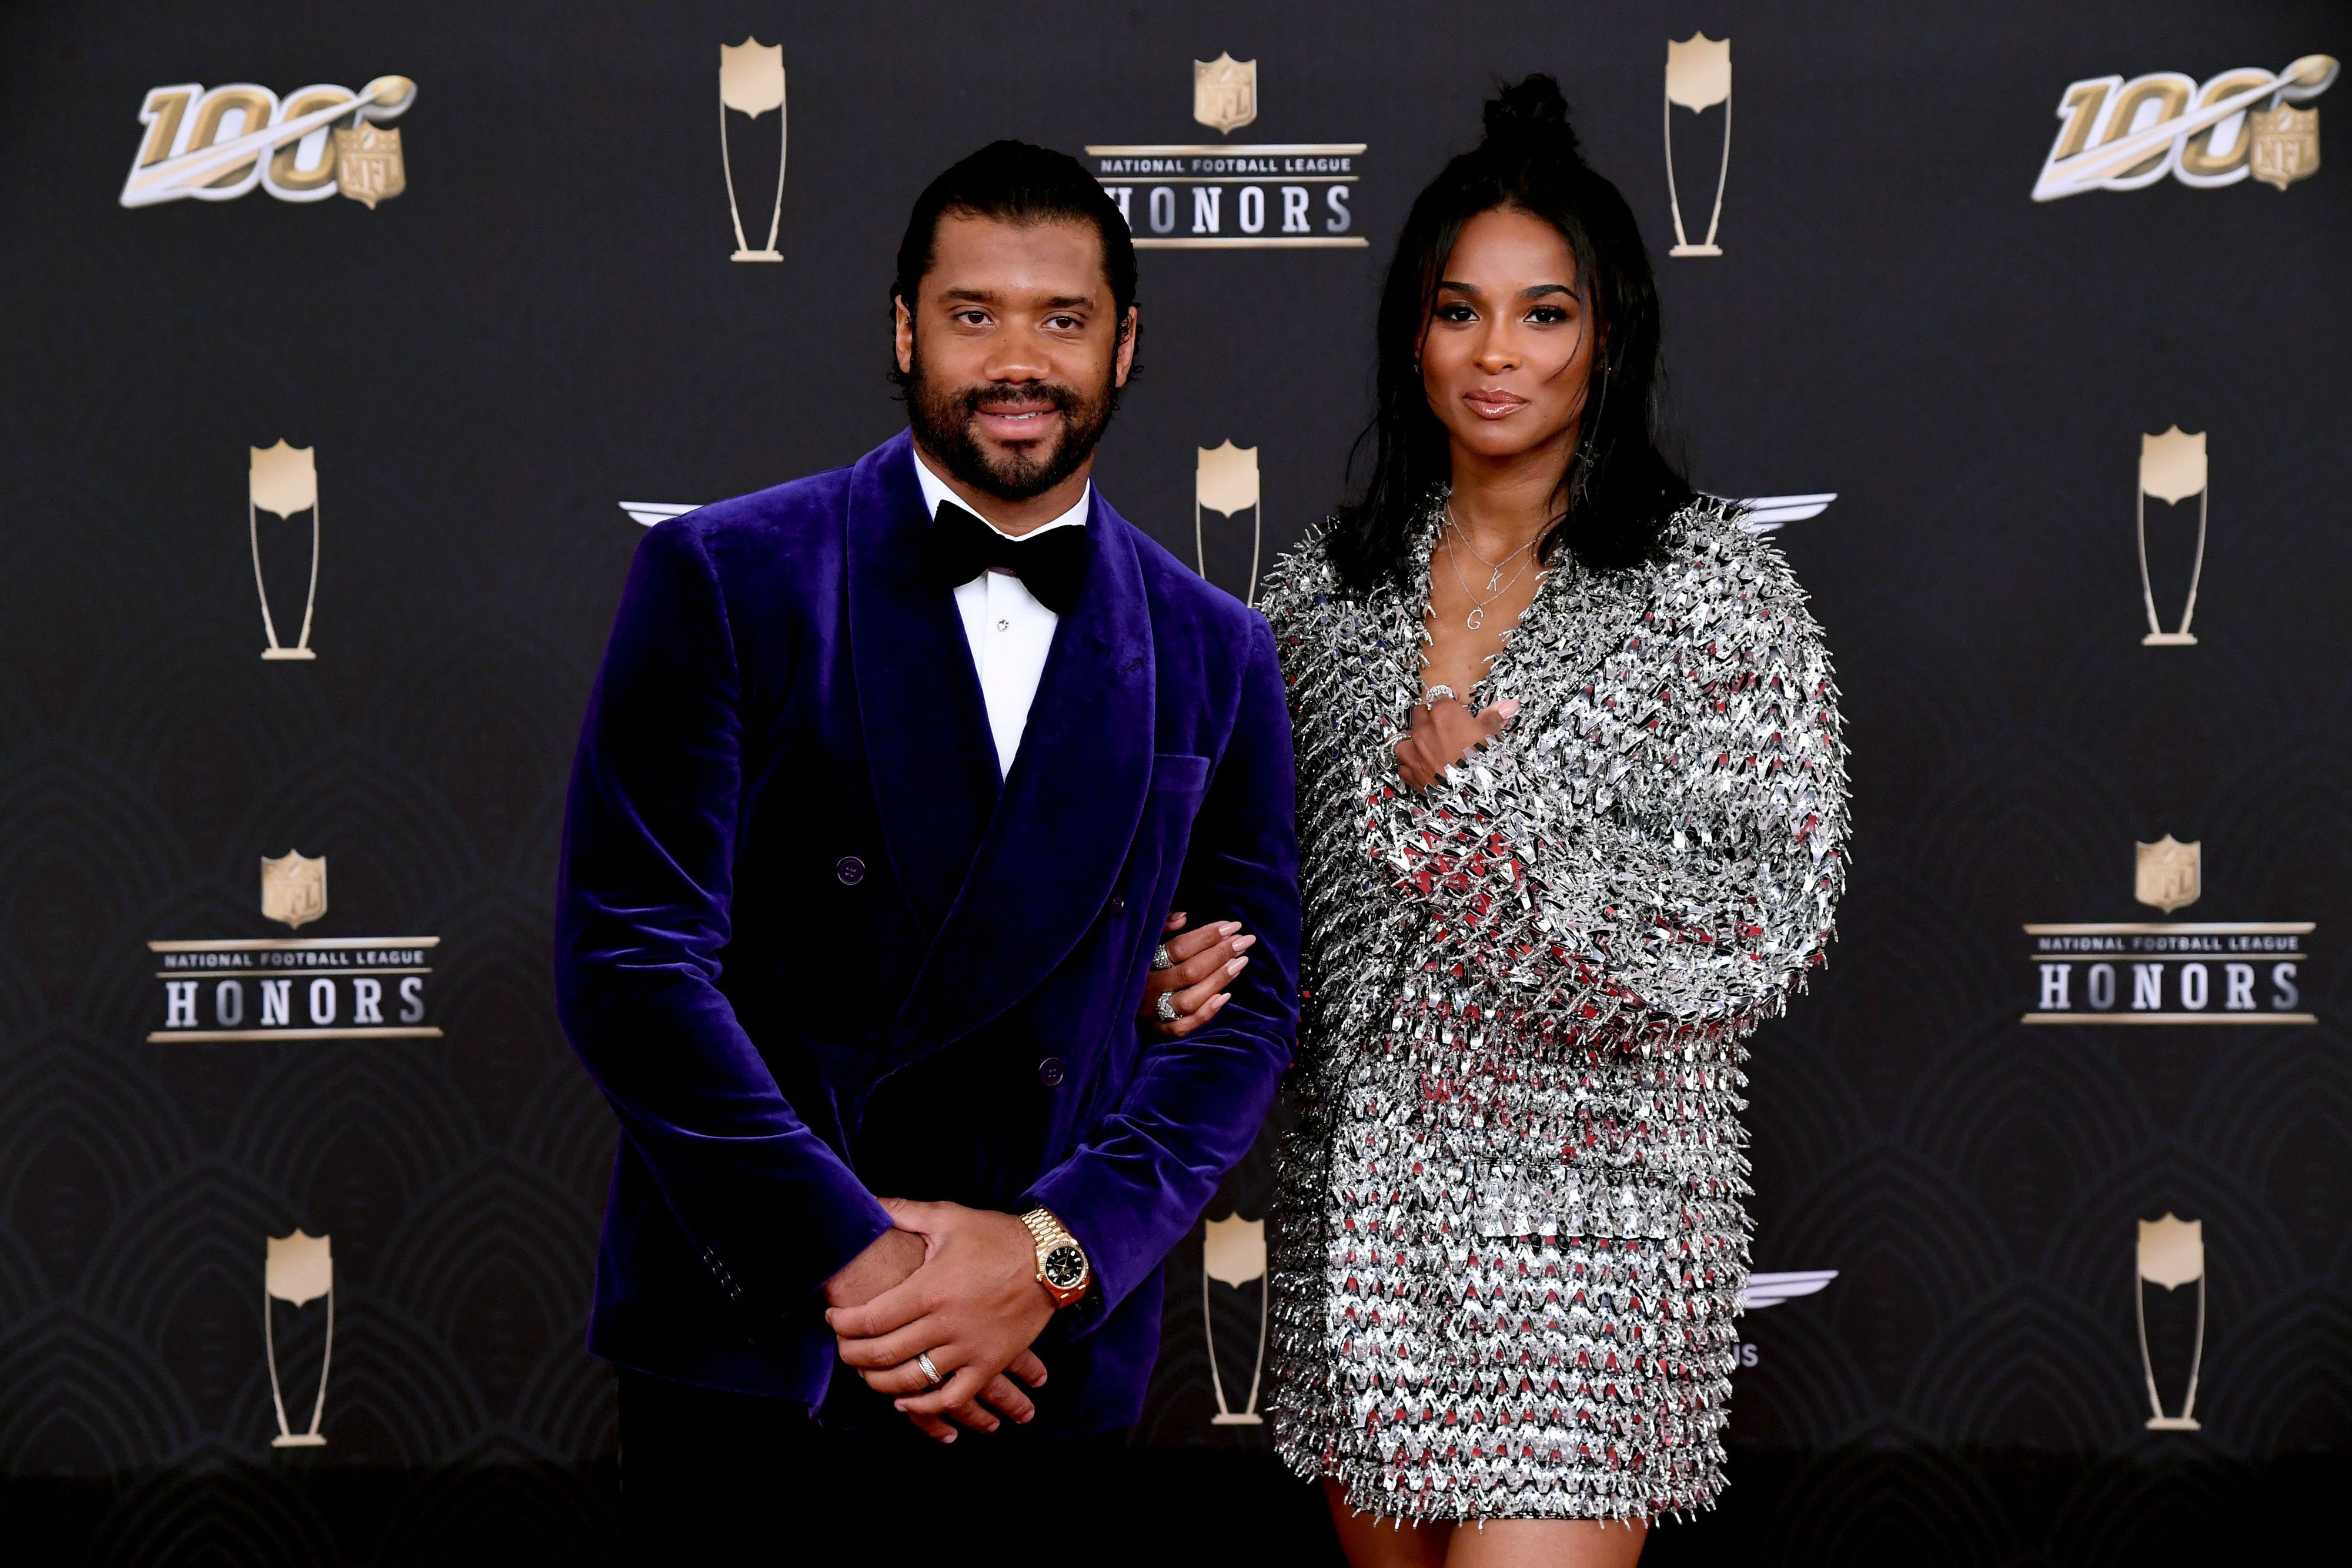 Russell Wilson and Ciara attend the 9th Annual NFL Honors at Adrienne Arsht Center on February 01, 2020 | Photo: Getty Images